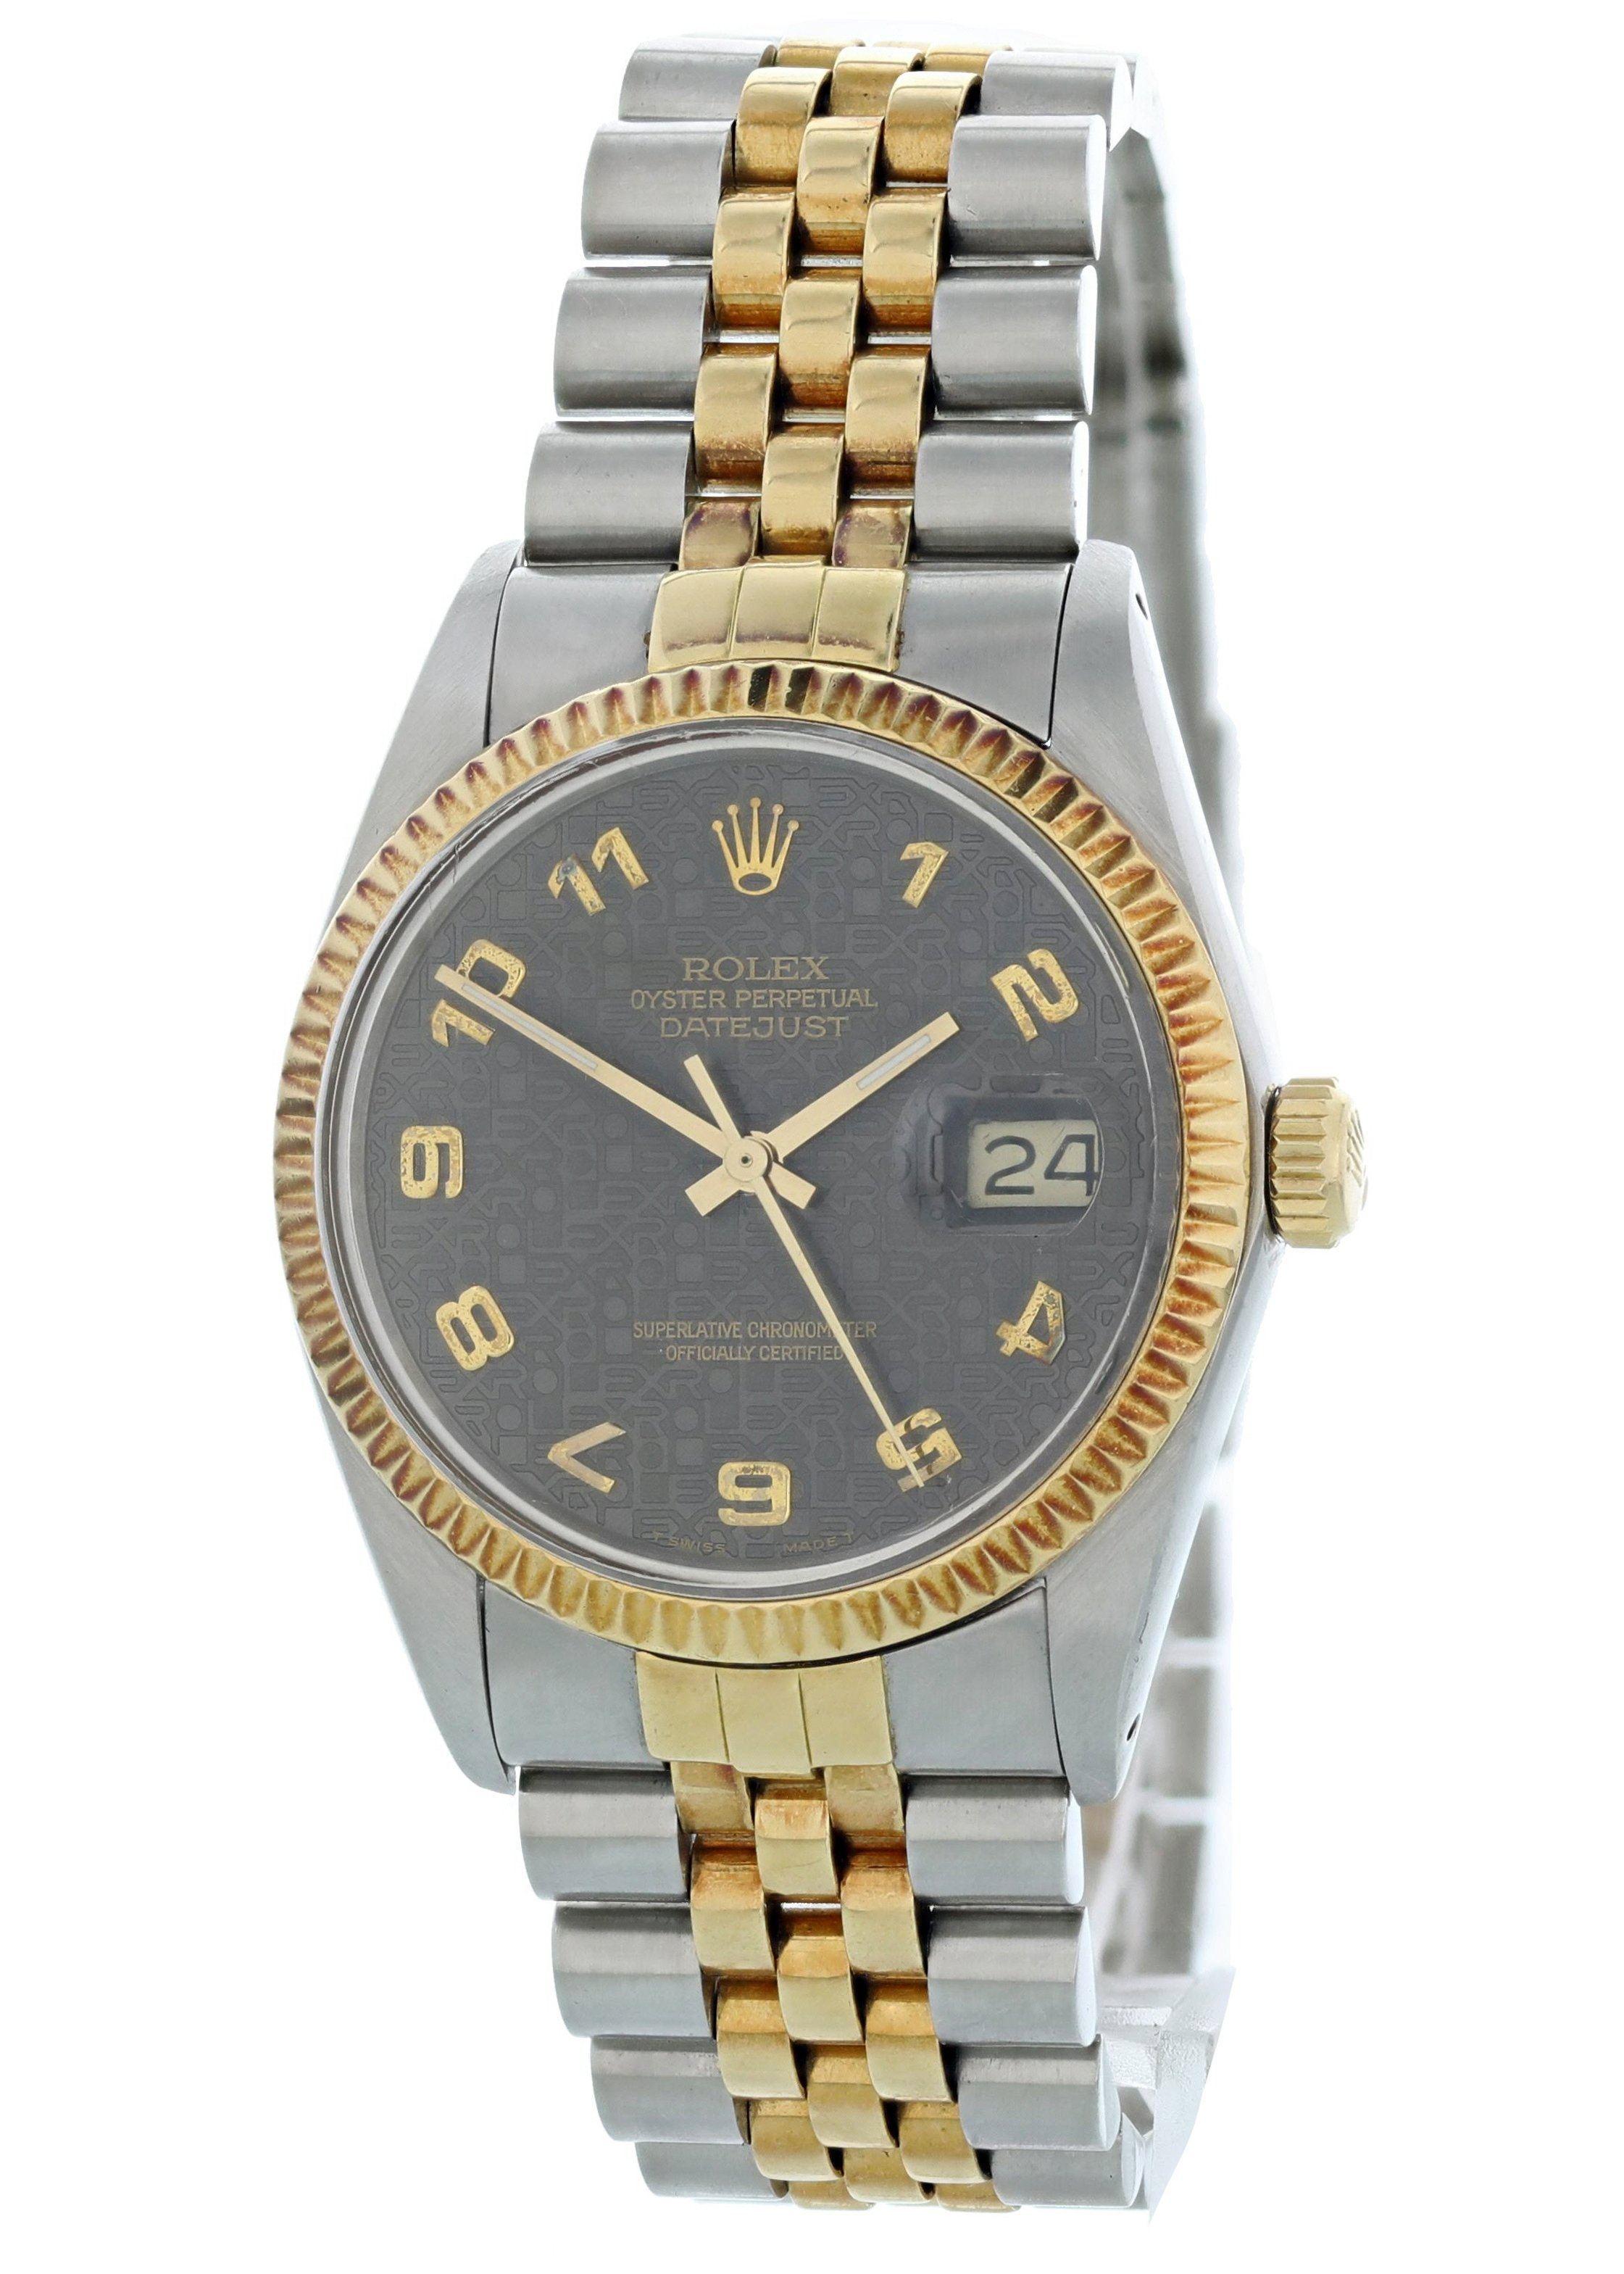 Rolex Oyster Perpetual Datejust 16013 Mens Watch. Stainless steel 36mm case. 18k yellow gold fluted bezel. Grey Rolex design dial with gold hands and Arabic numeral hour markers. Date display at the 3 o'clock position. 18k yellow gold and stainless